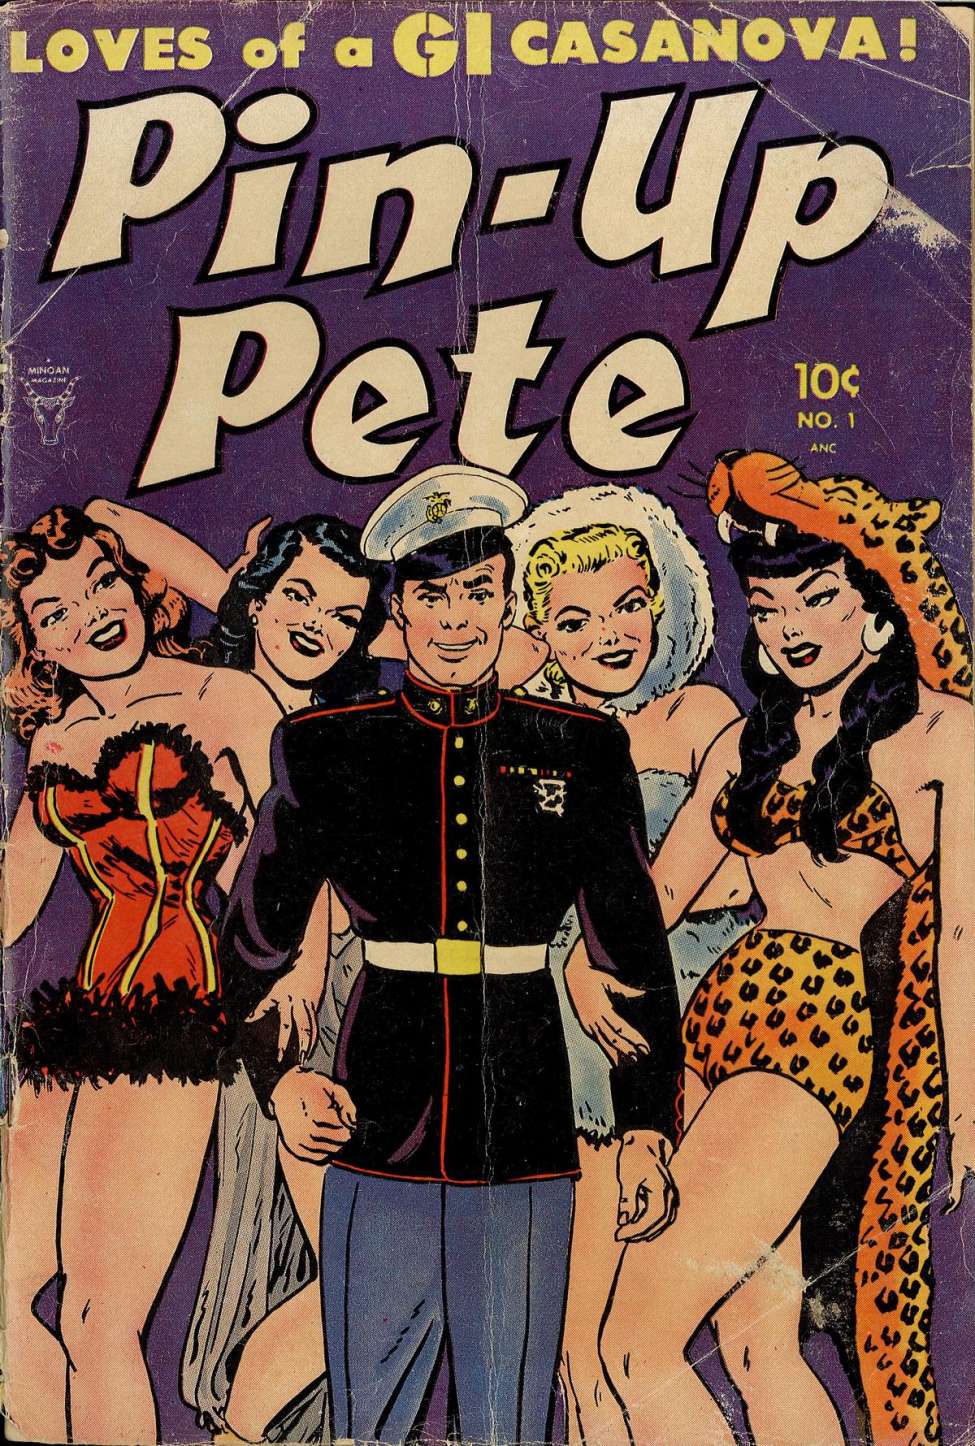 Book Cover For Pin-Up Pete 1